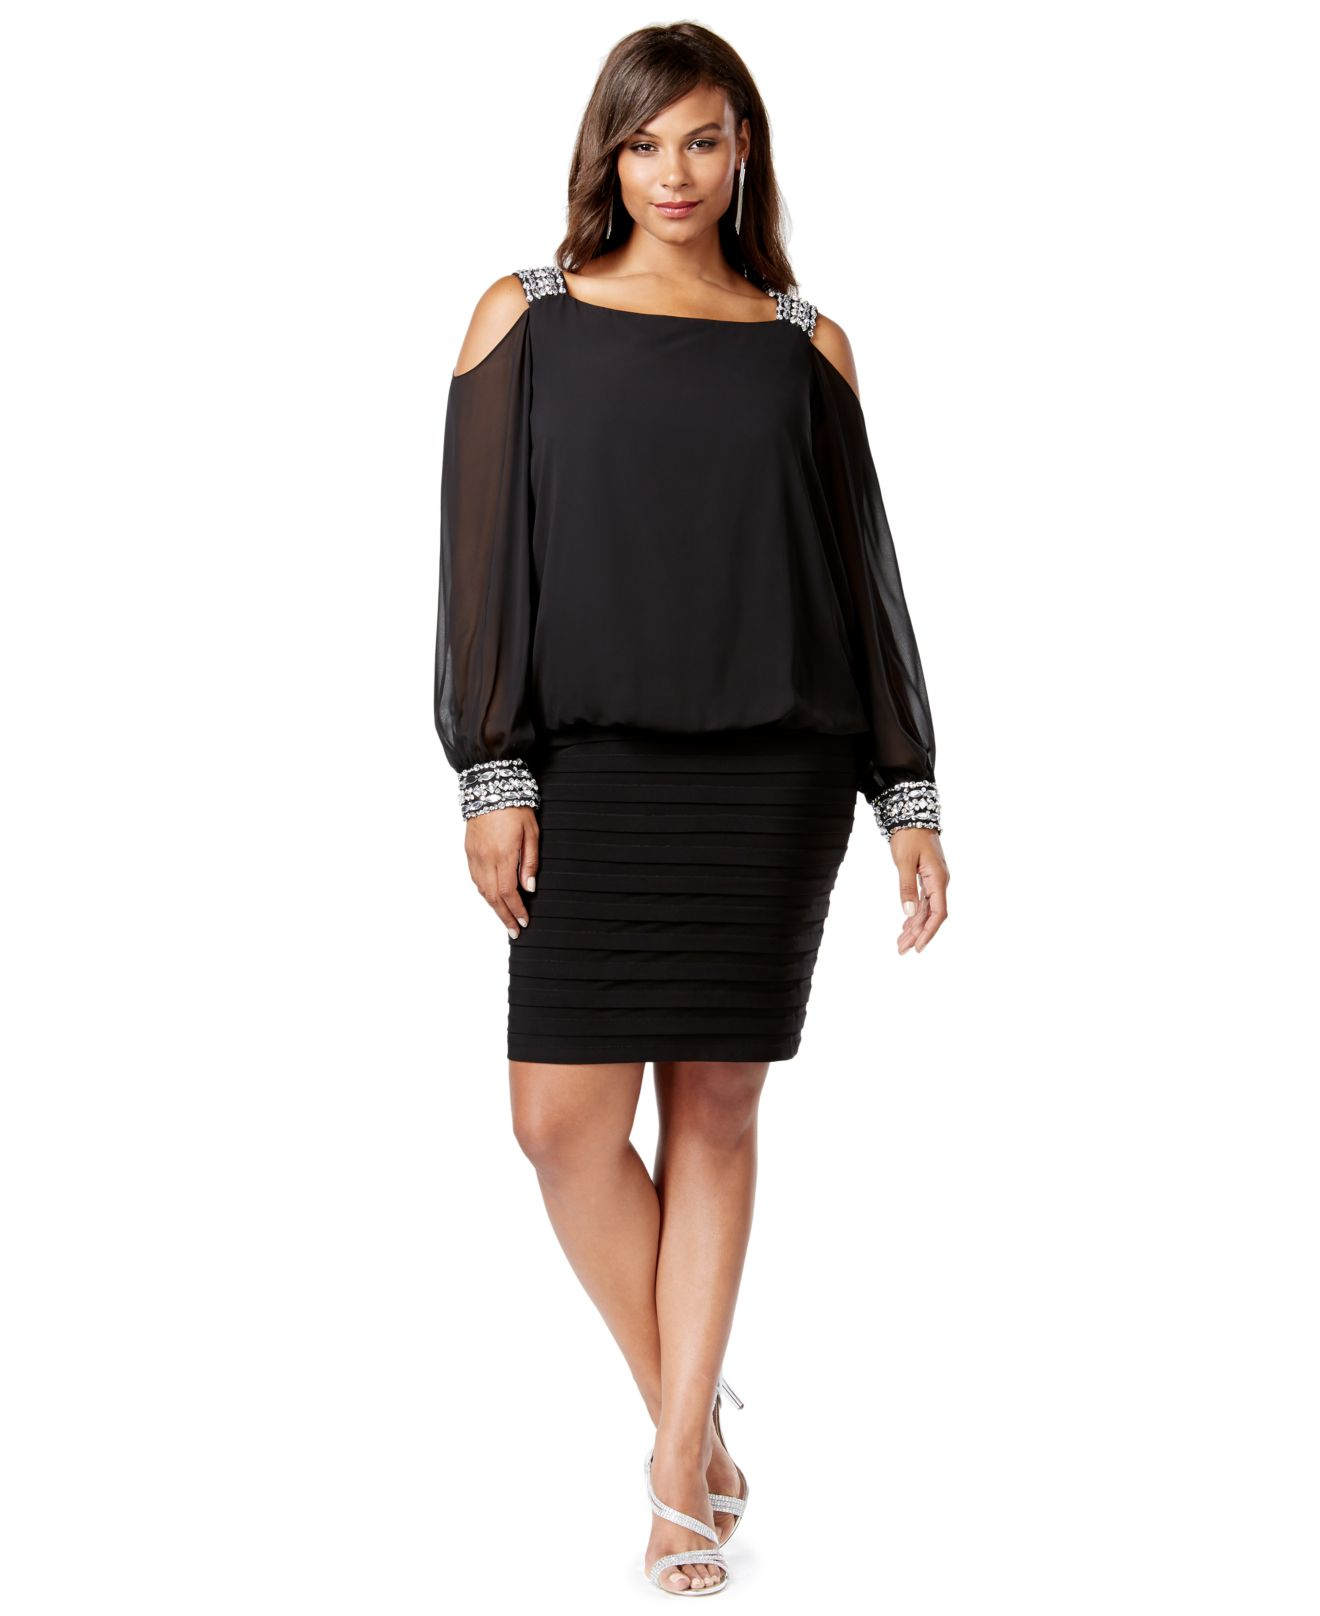 ... embellished blouson dress 199 from macy s us free shipping buy